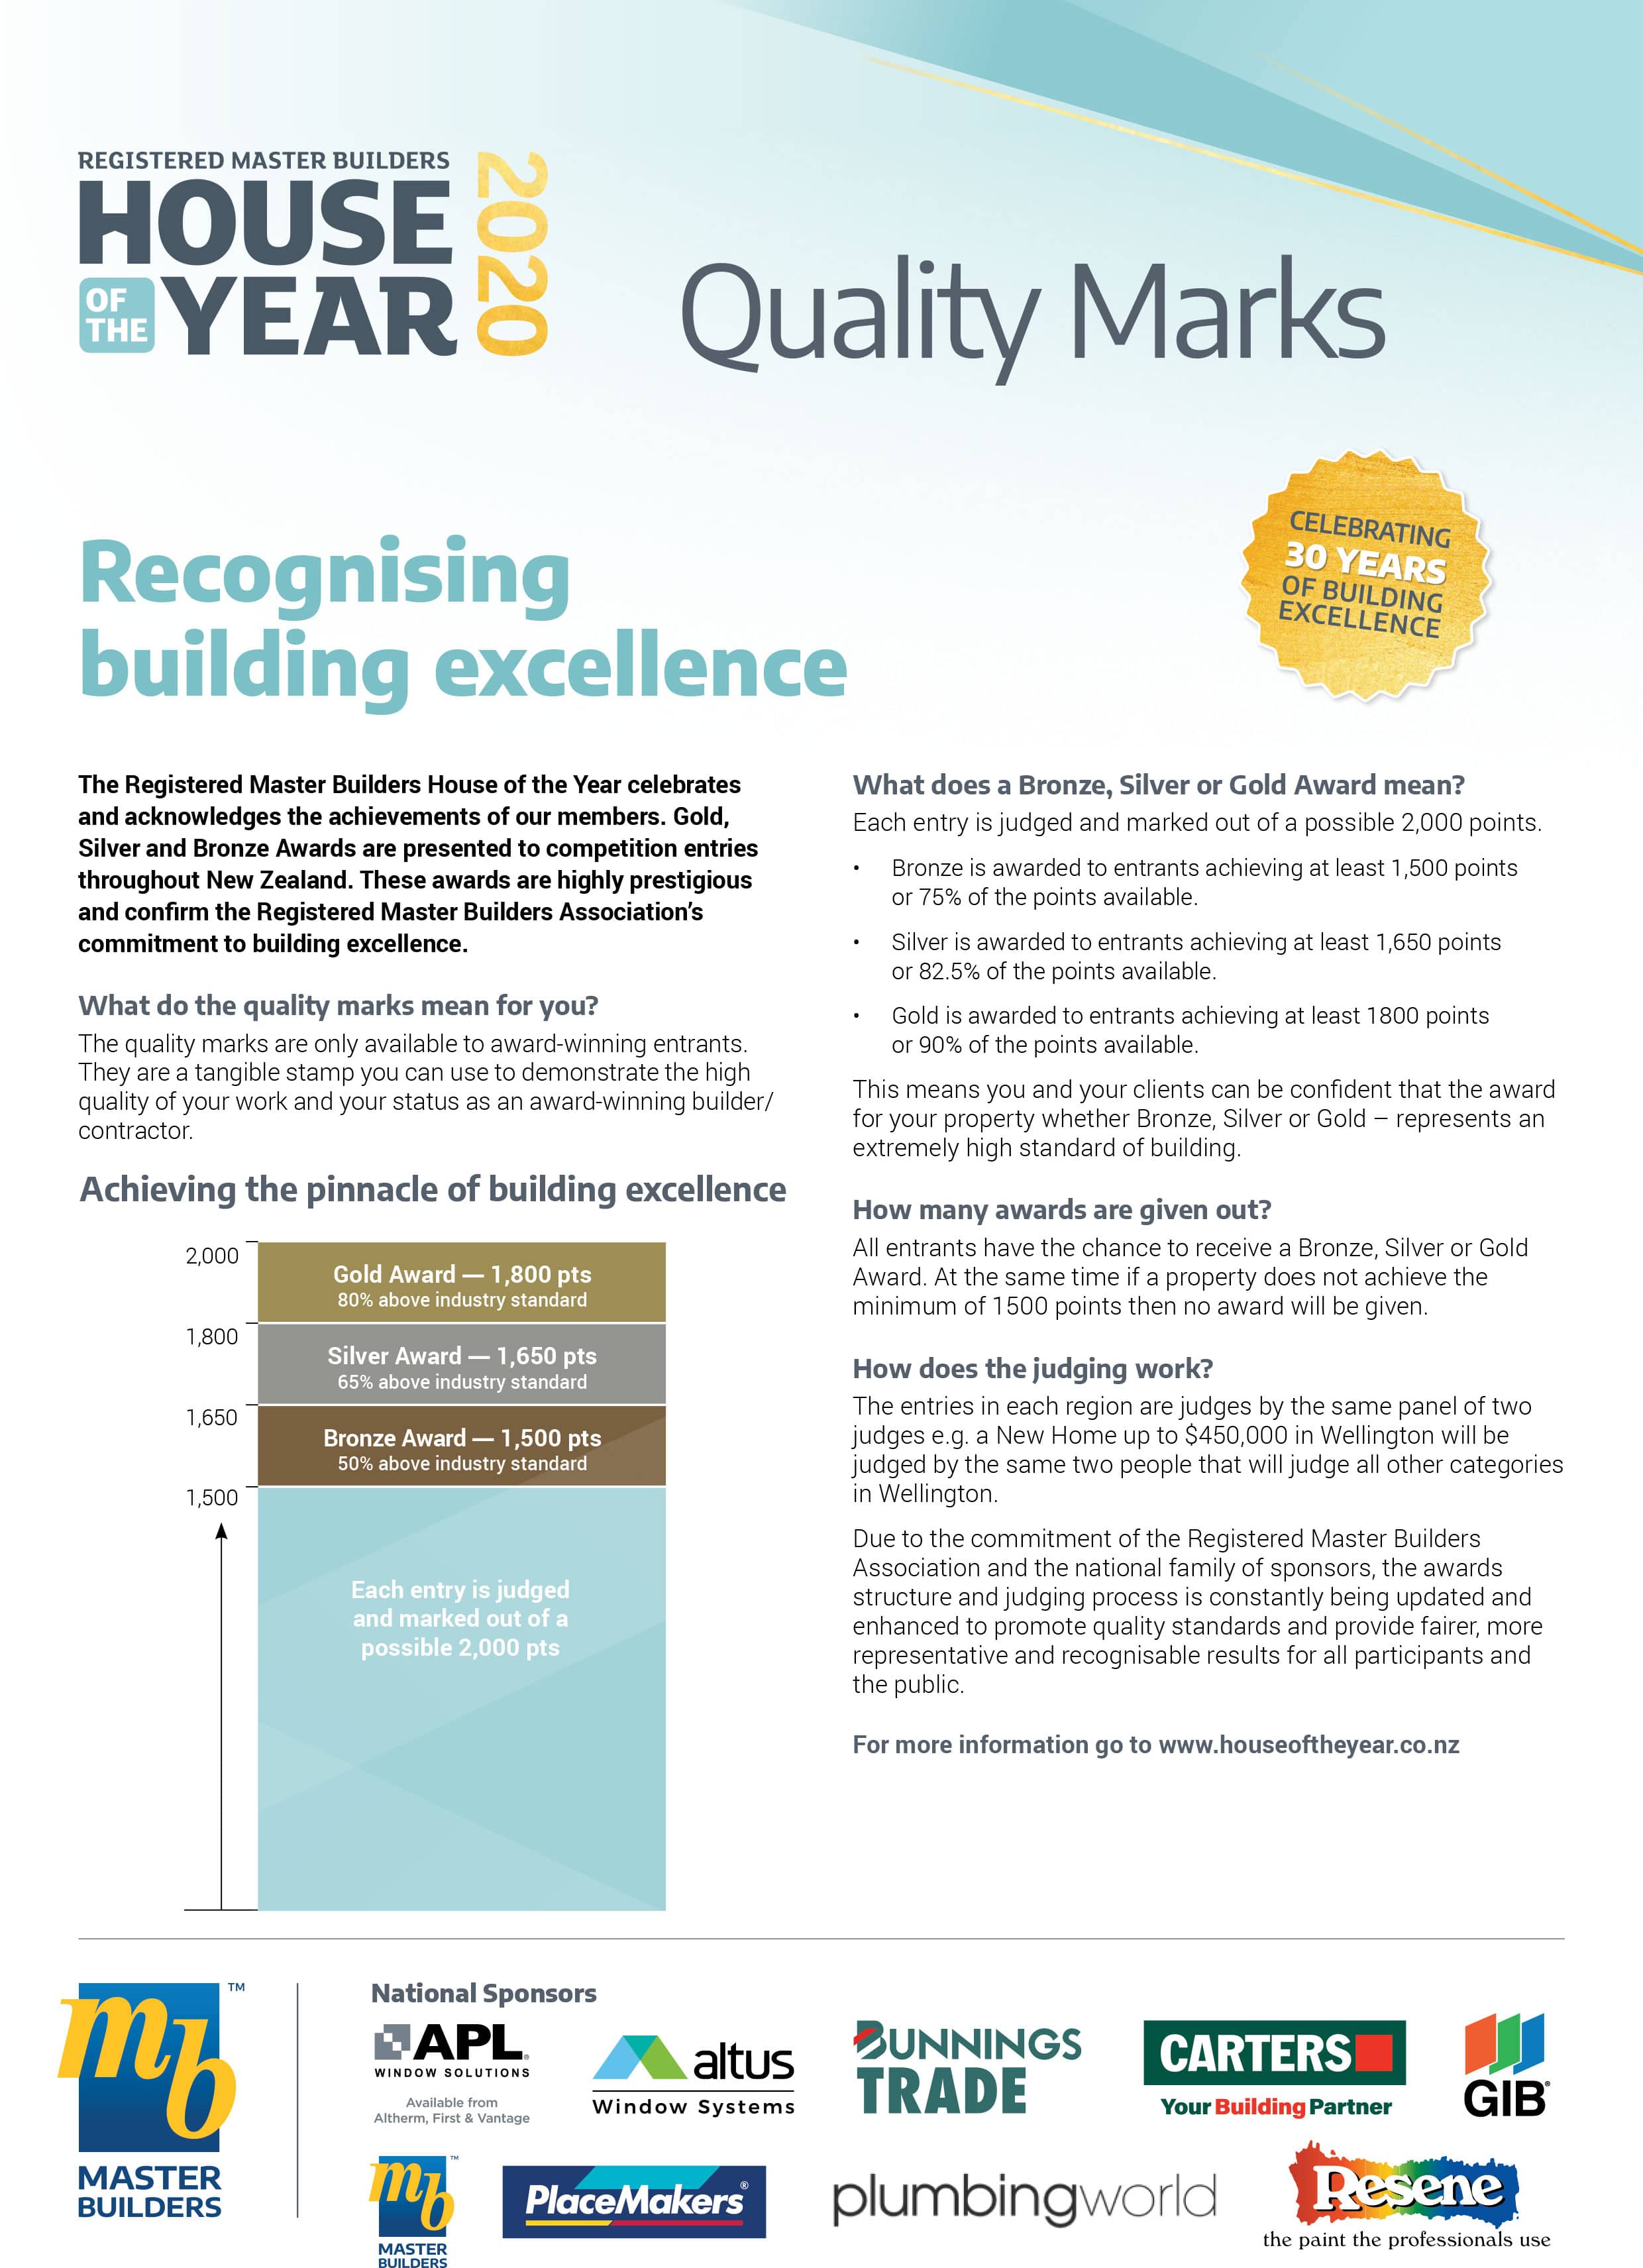 HOY-Quality-Mark-building-excellence